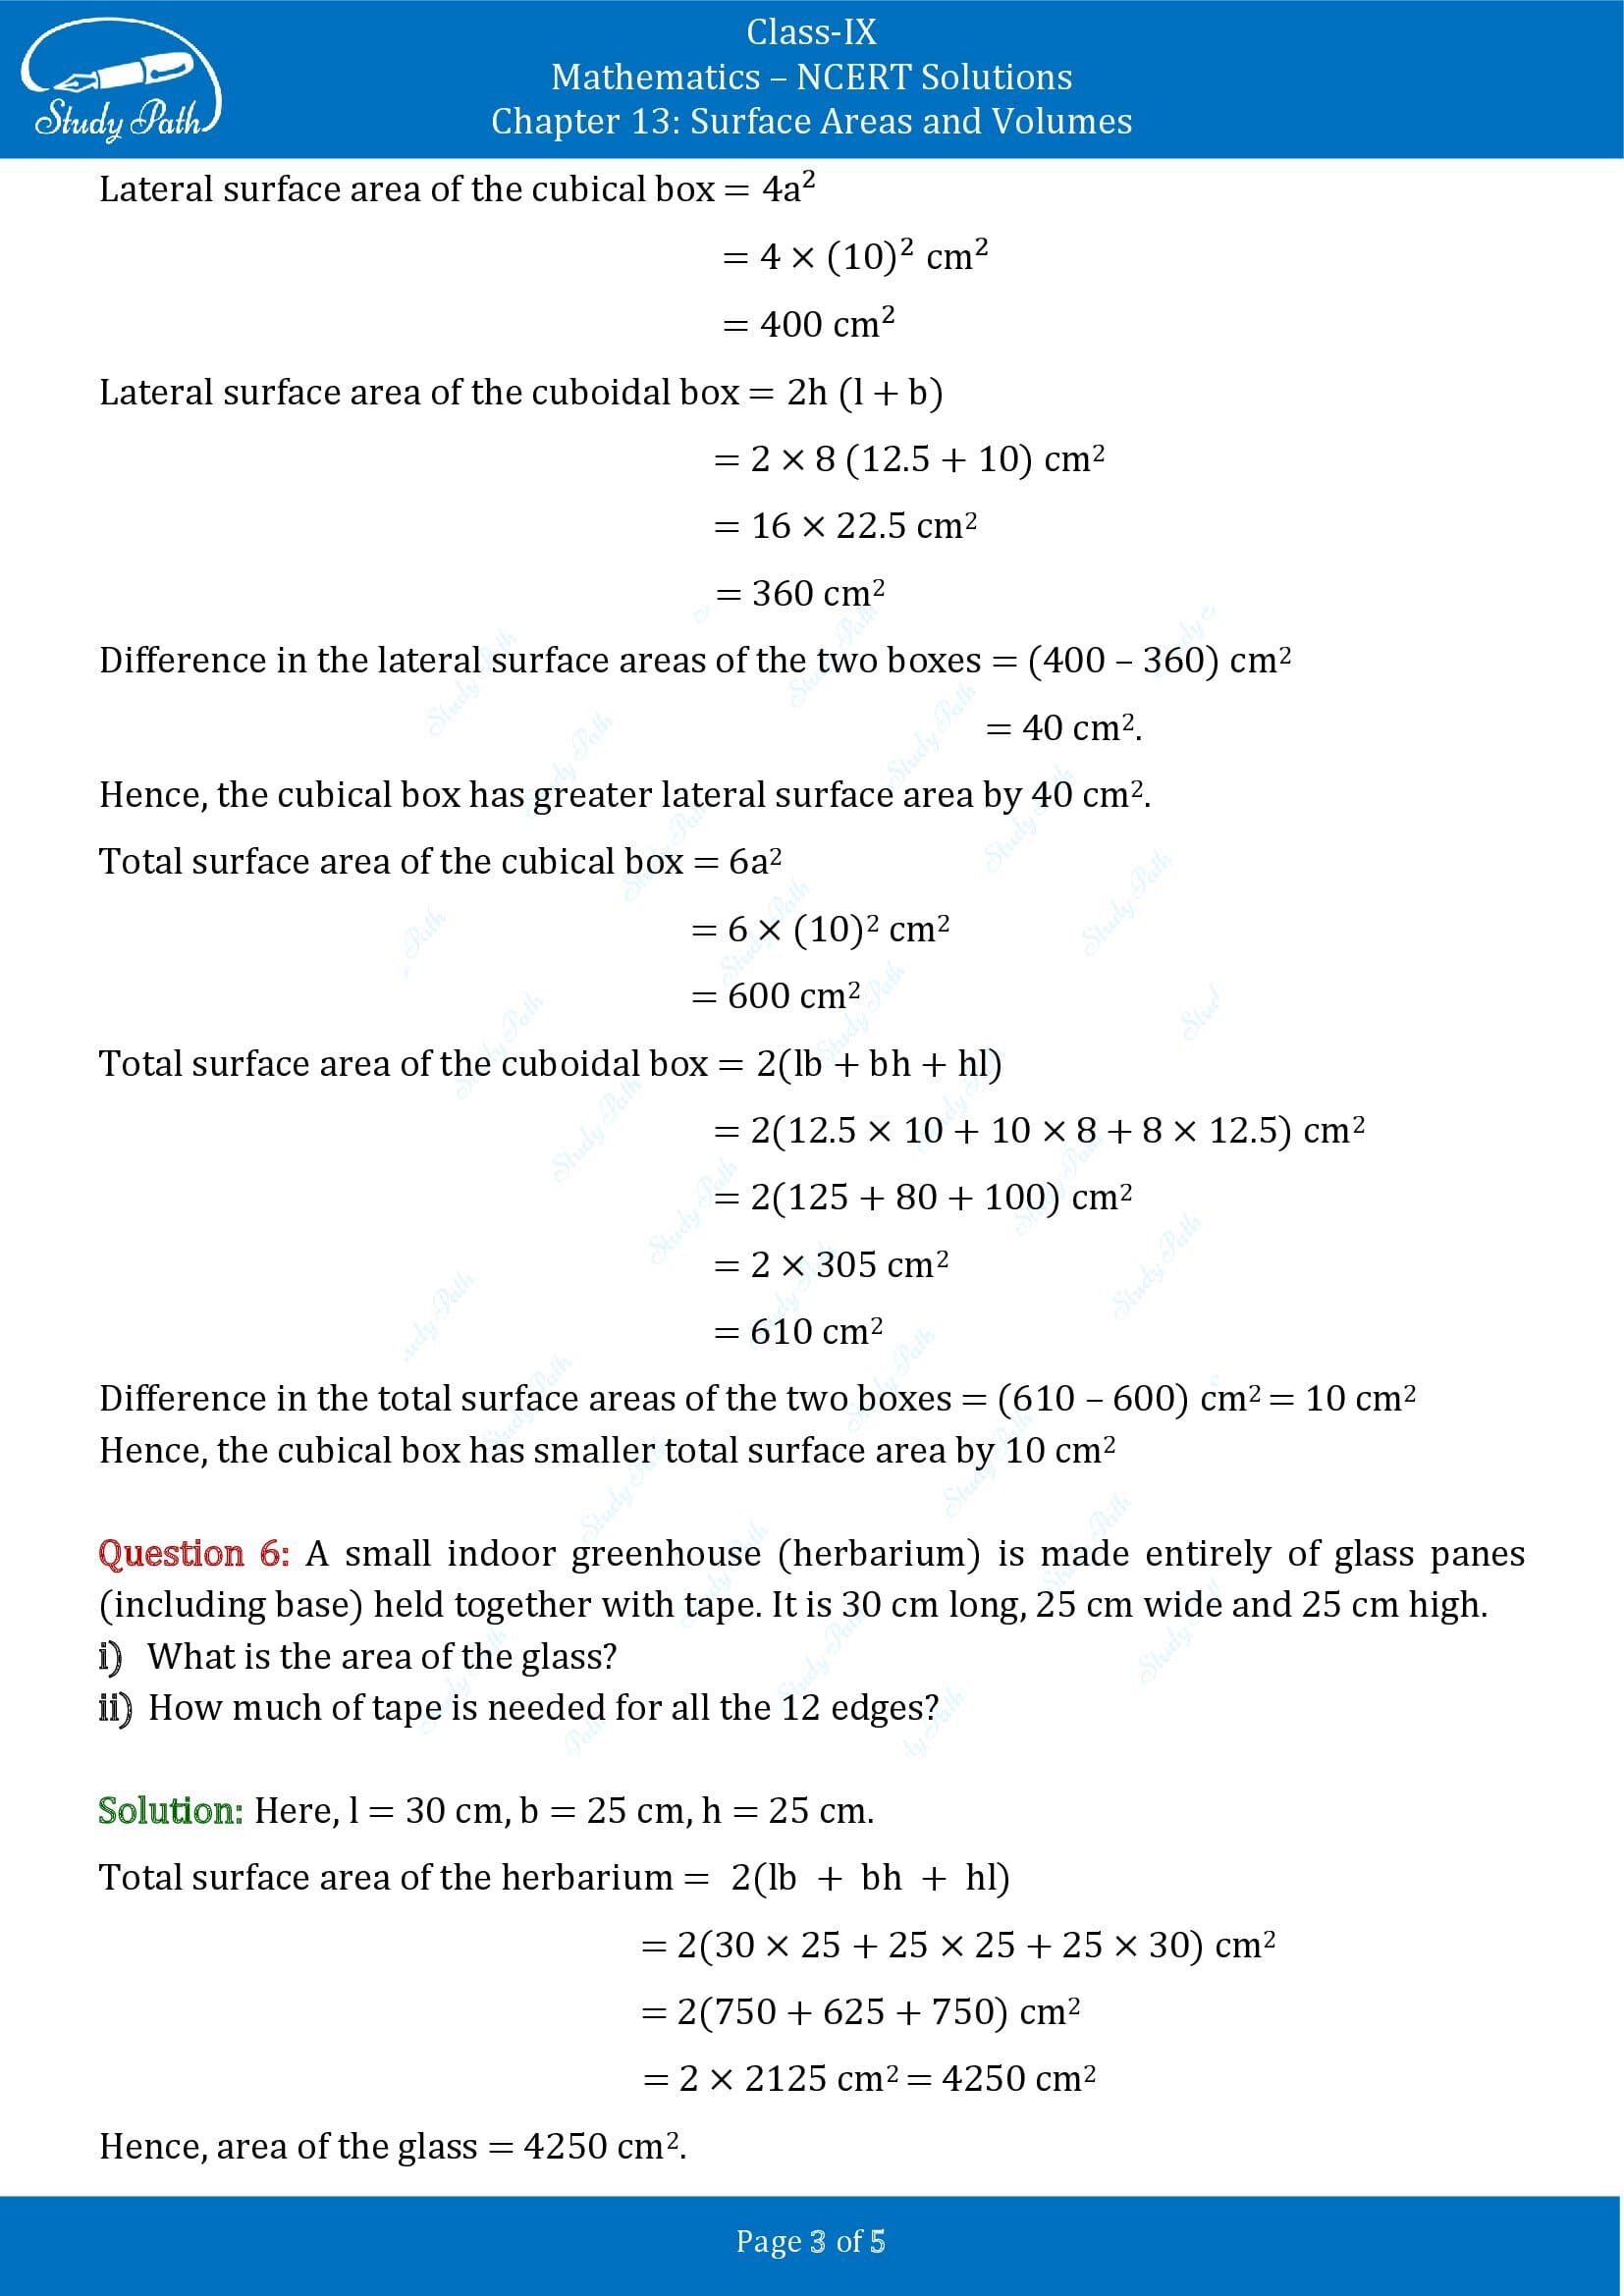 NCERT Solutions for Class 9 Maths Chapter 13 Surface Areas and Volumes Exercise 13.1 00003